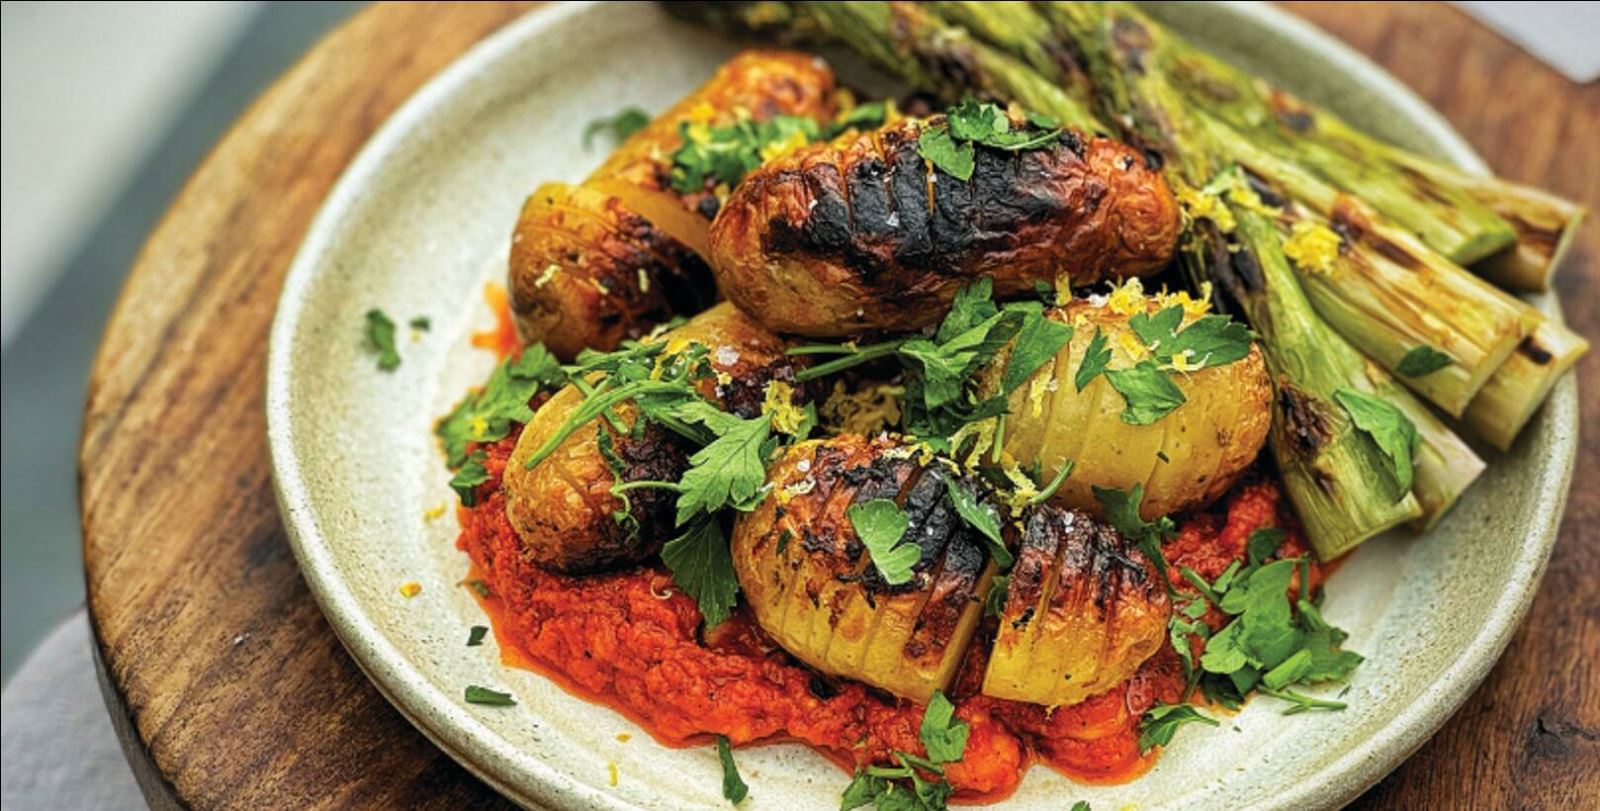 Hasselback potatoes with grilled asparagus and romesco sauce